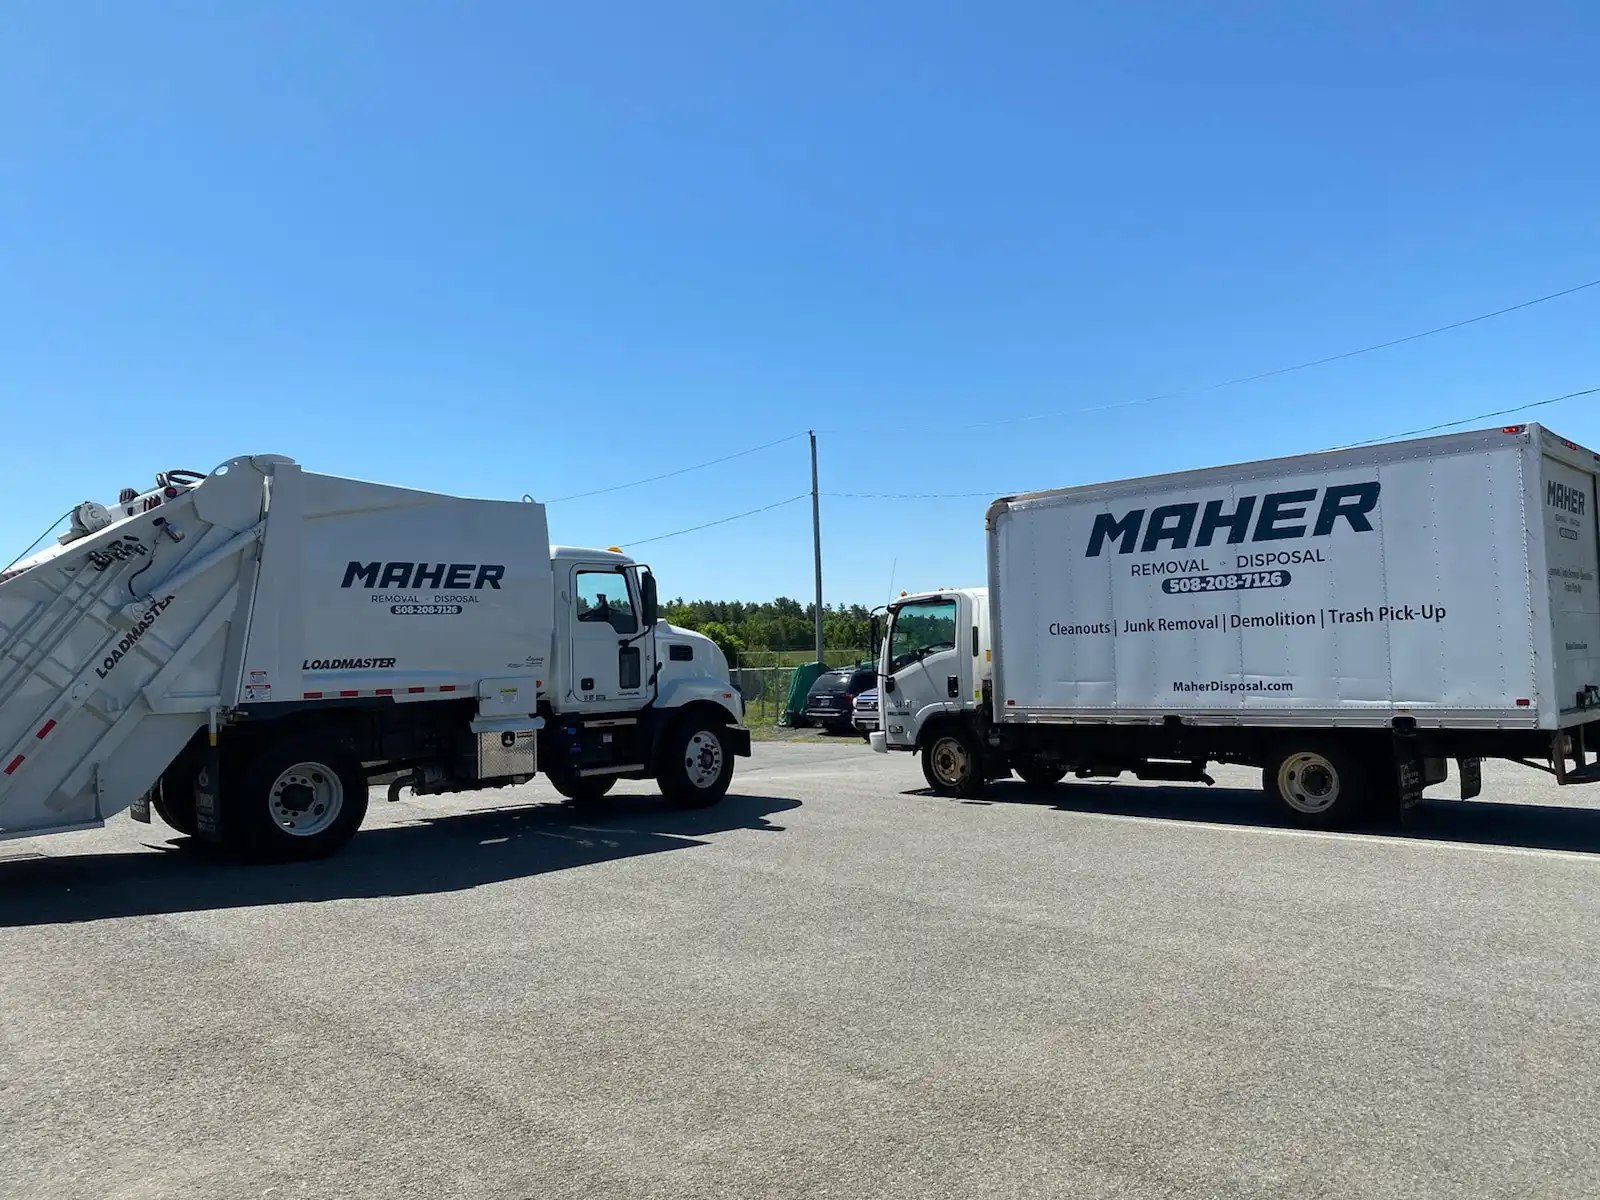 Maher Removal & Disposal is a Trash Pickup & Junk Removal company in South Easton, MA